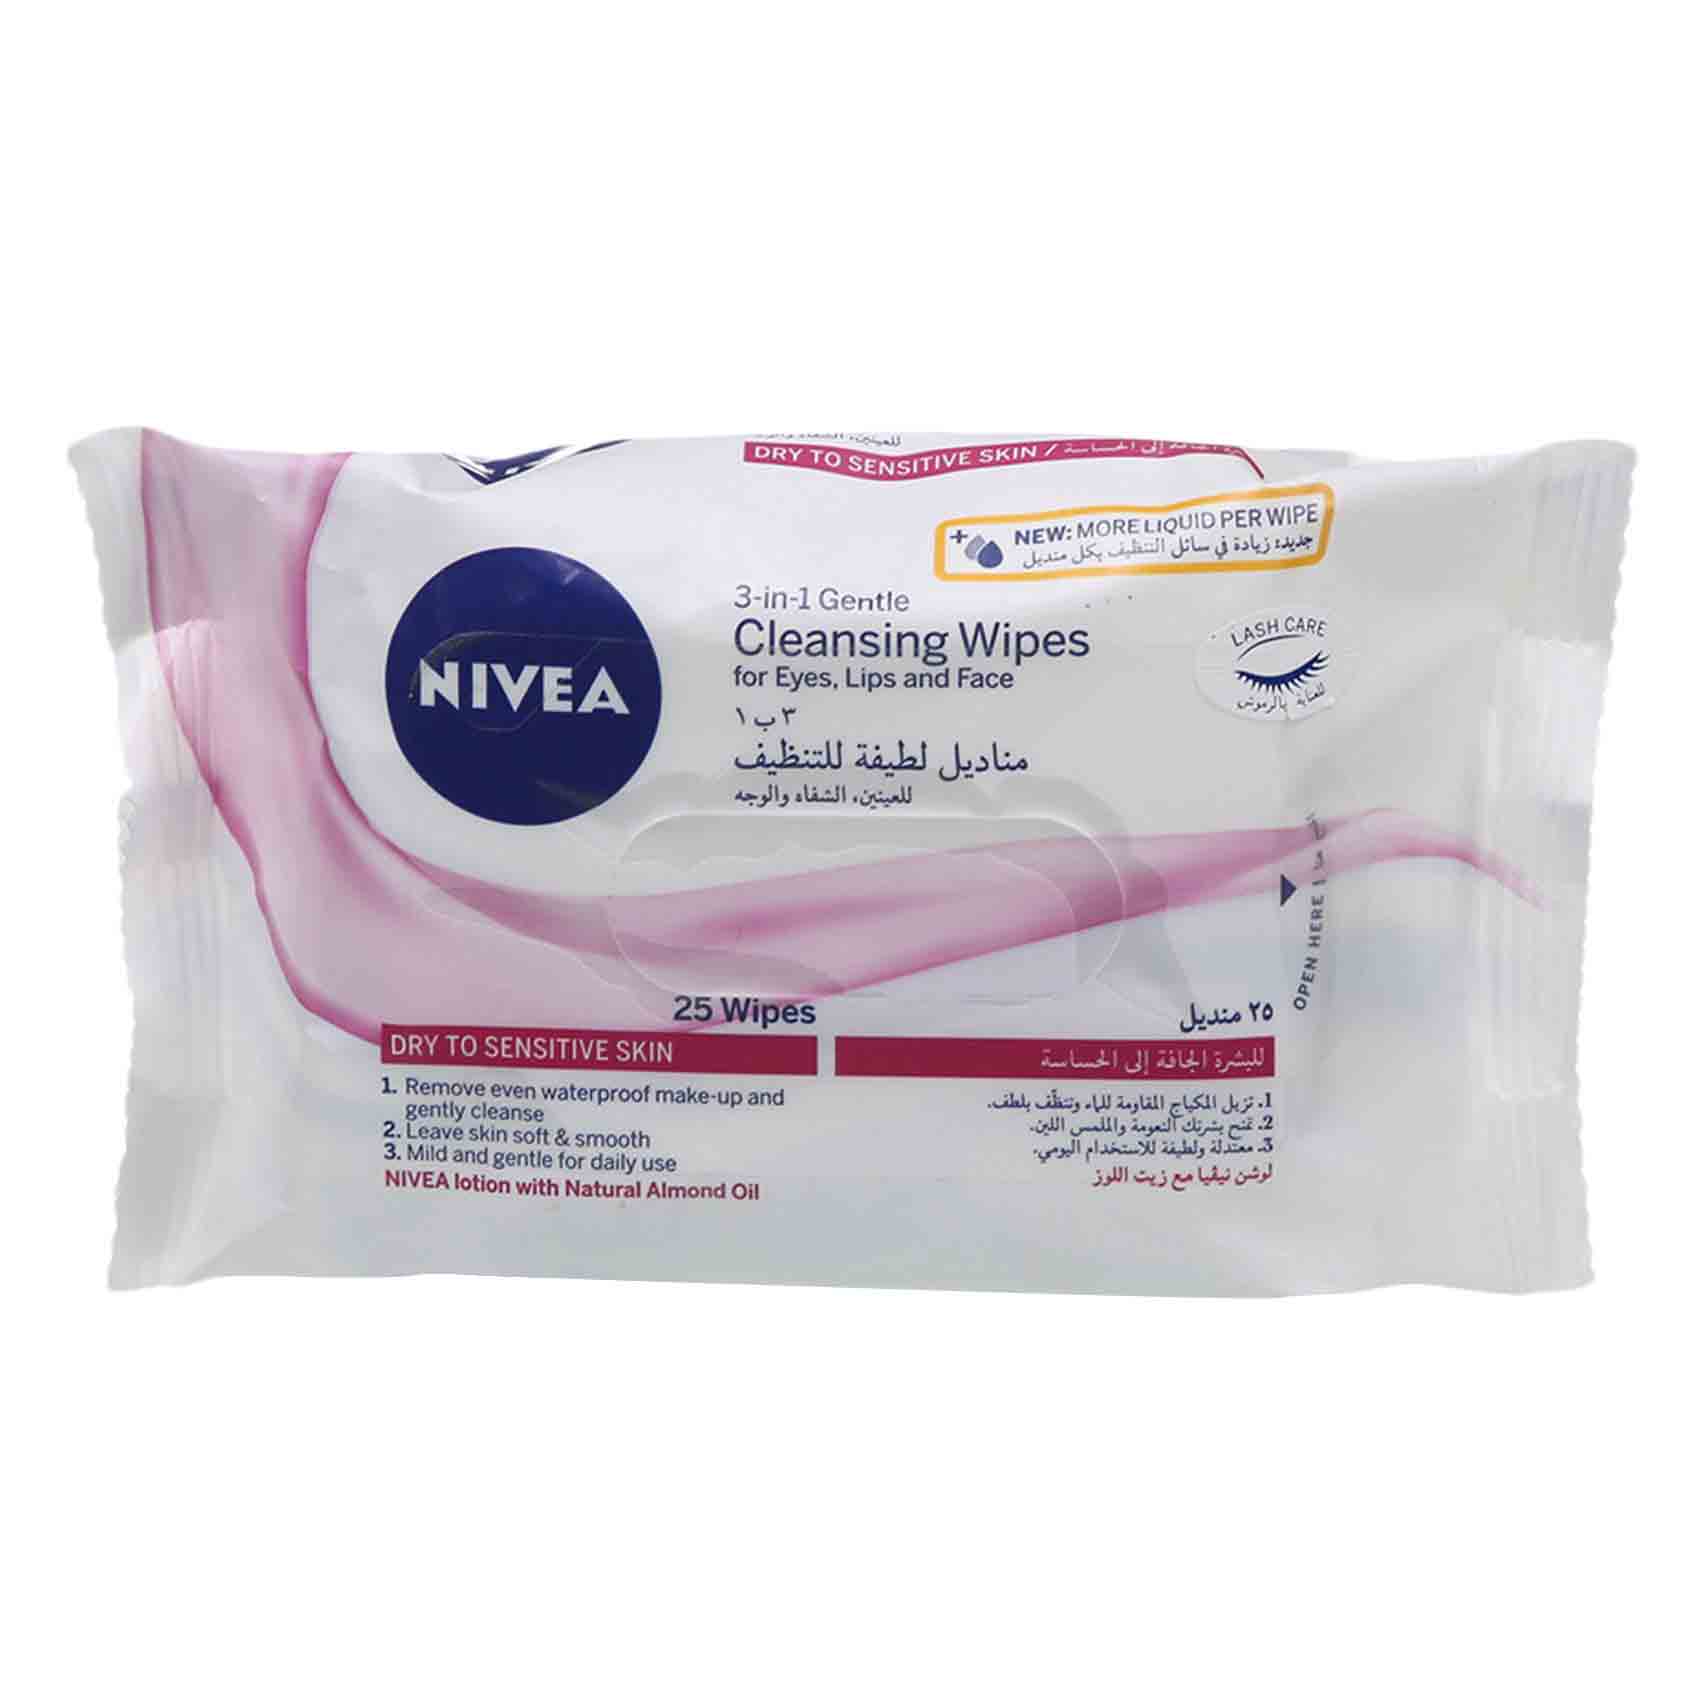 Nivea Gentle Cleansing Wipes 25 Count